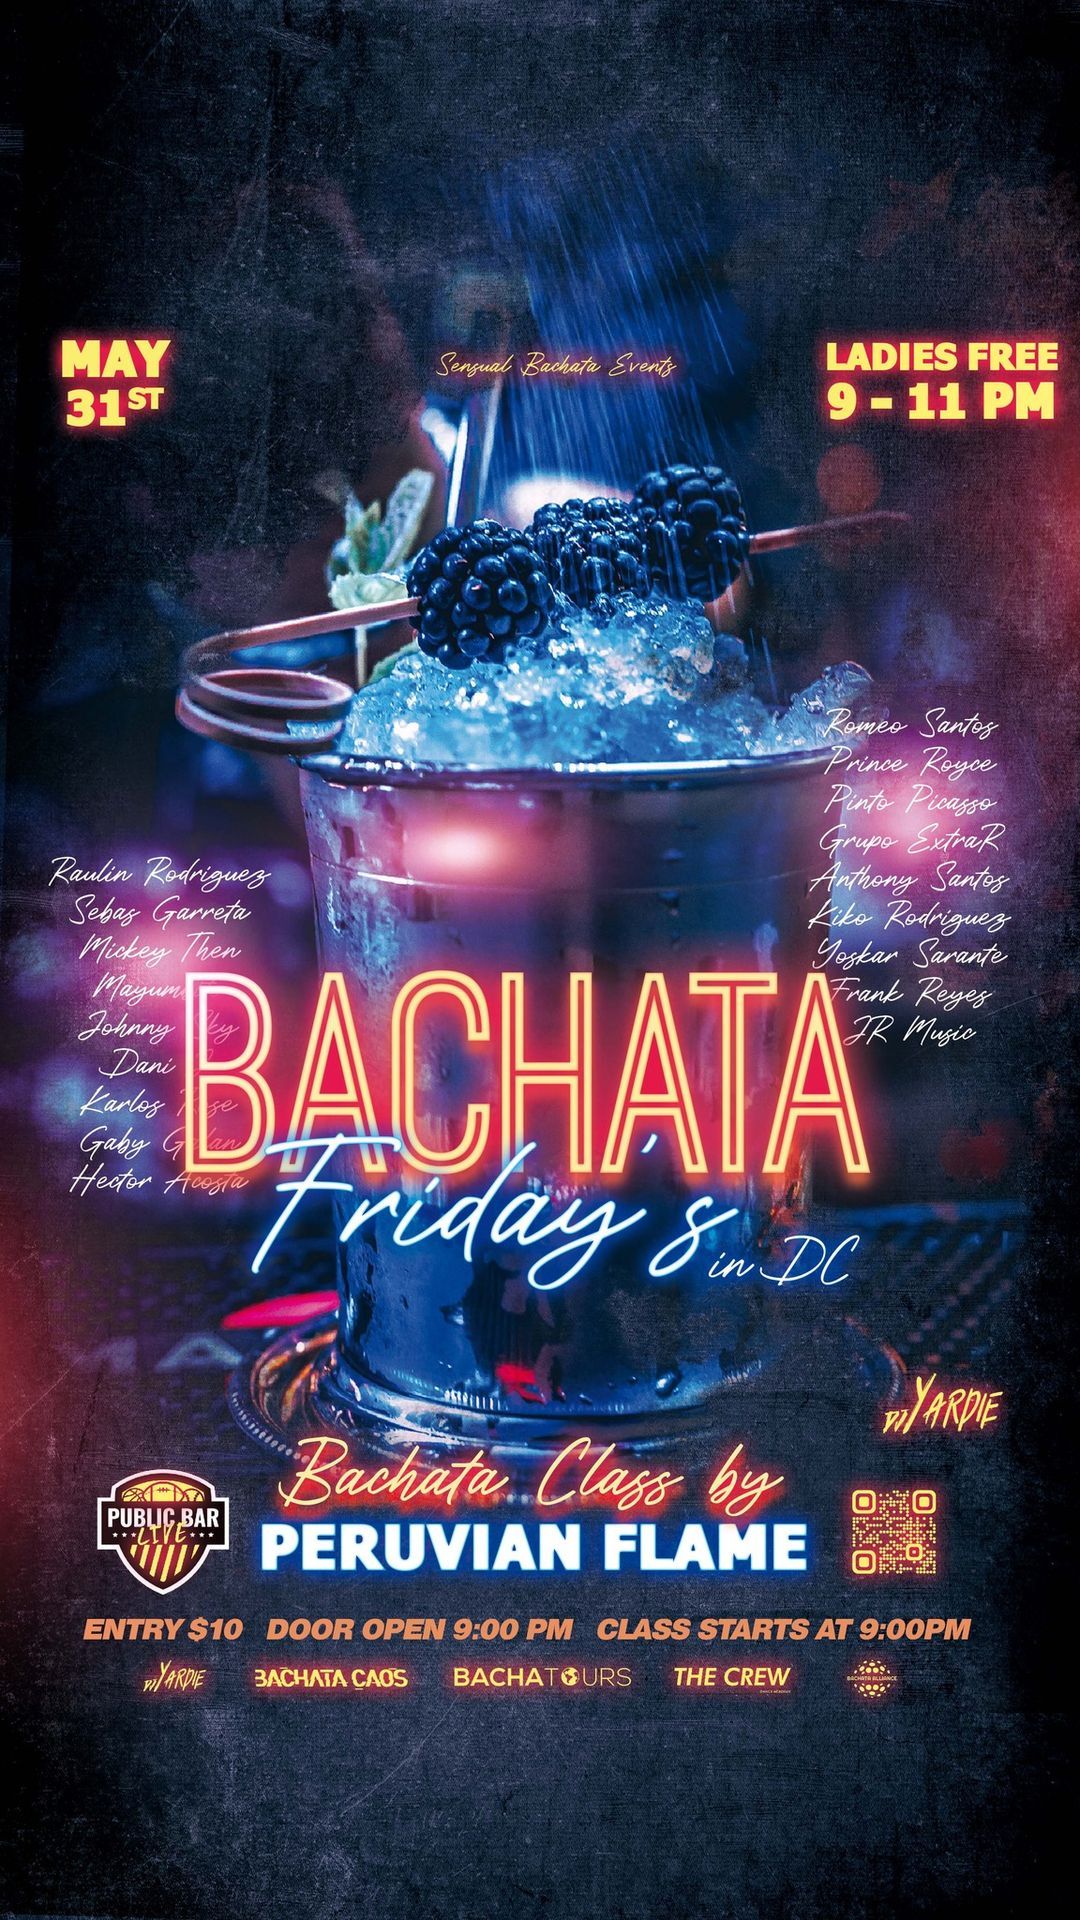 Bachata Fridays in DC